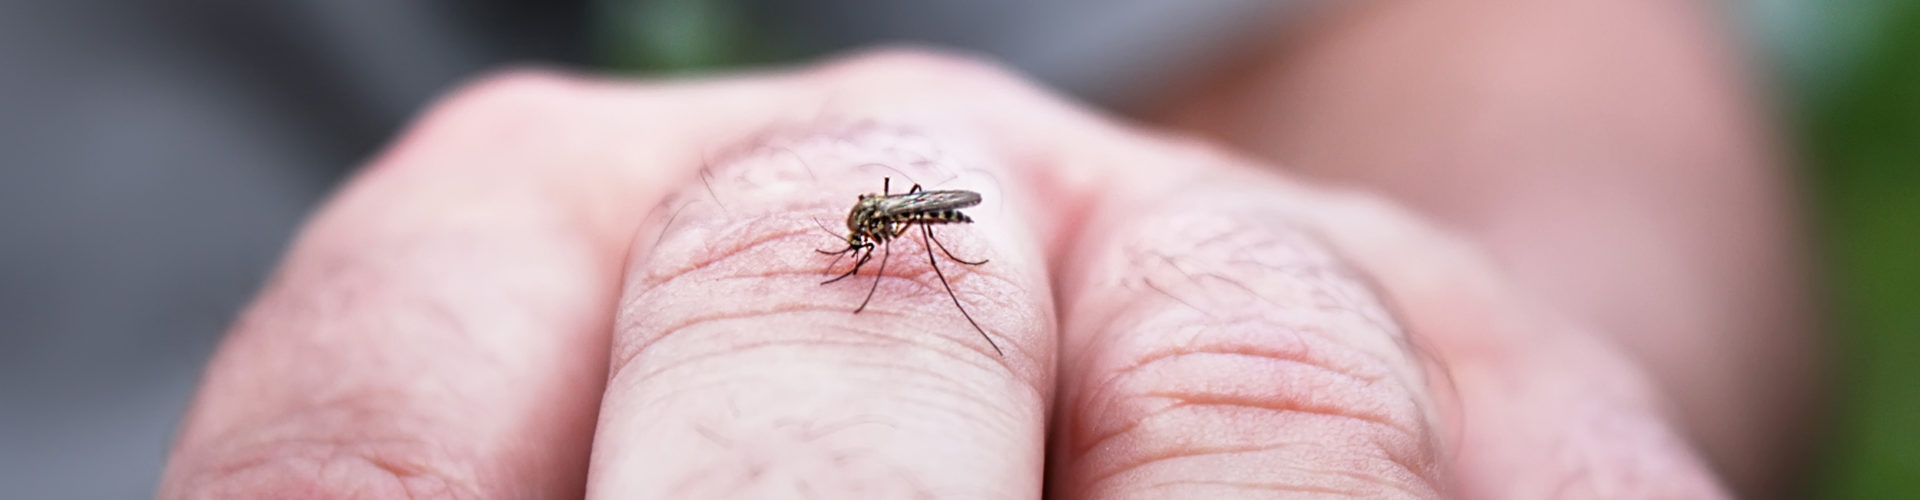 mosquito on a man's hand